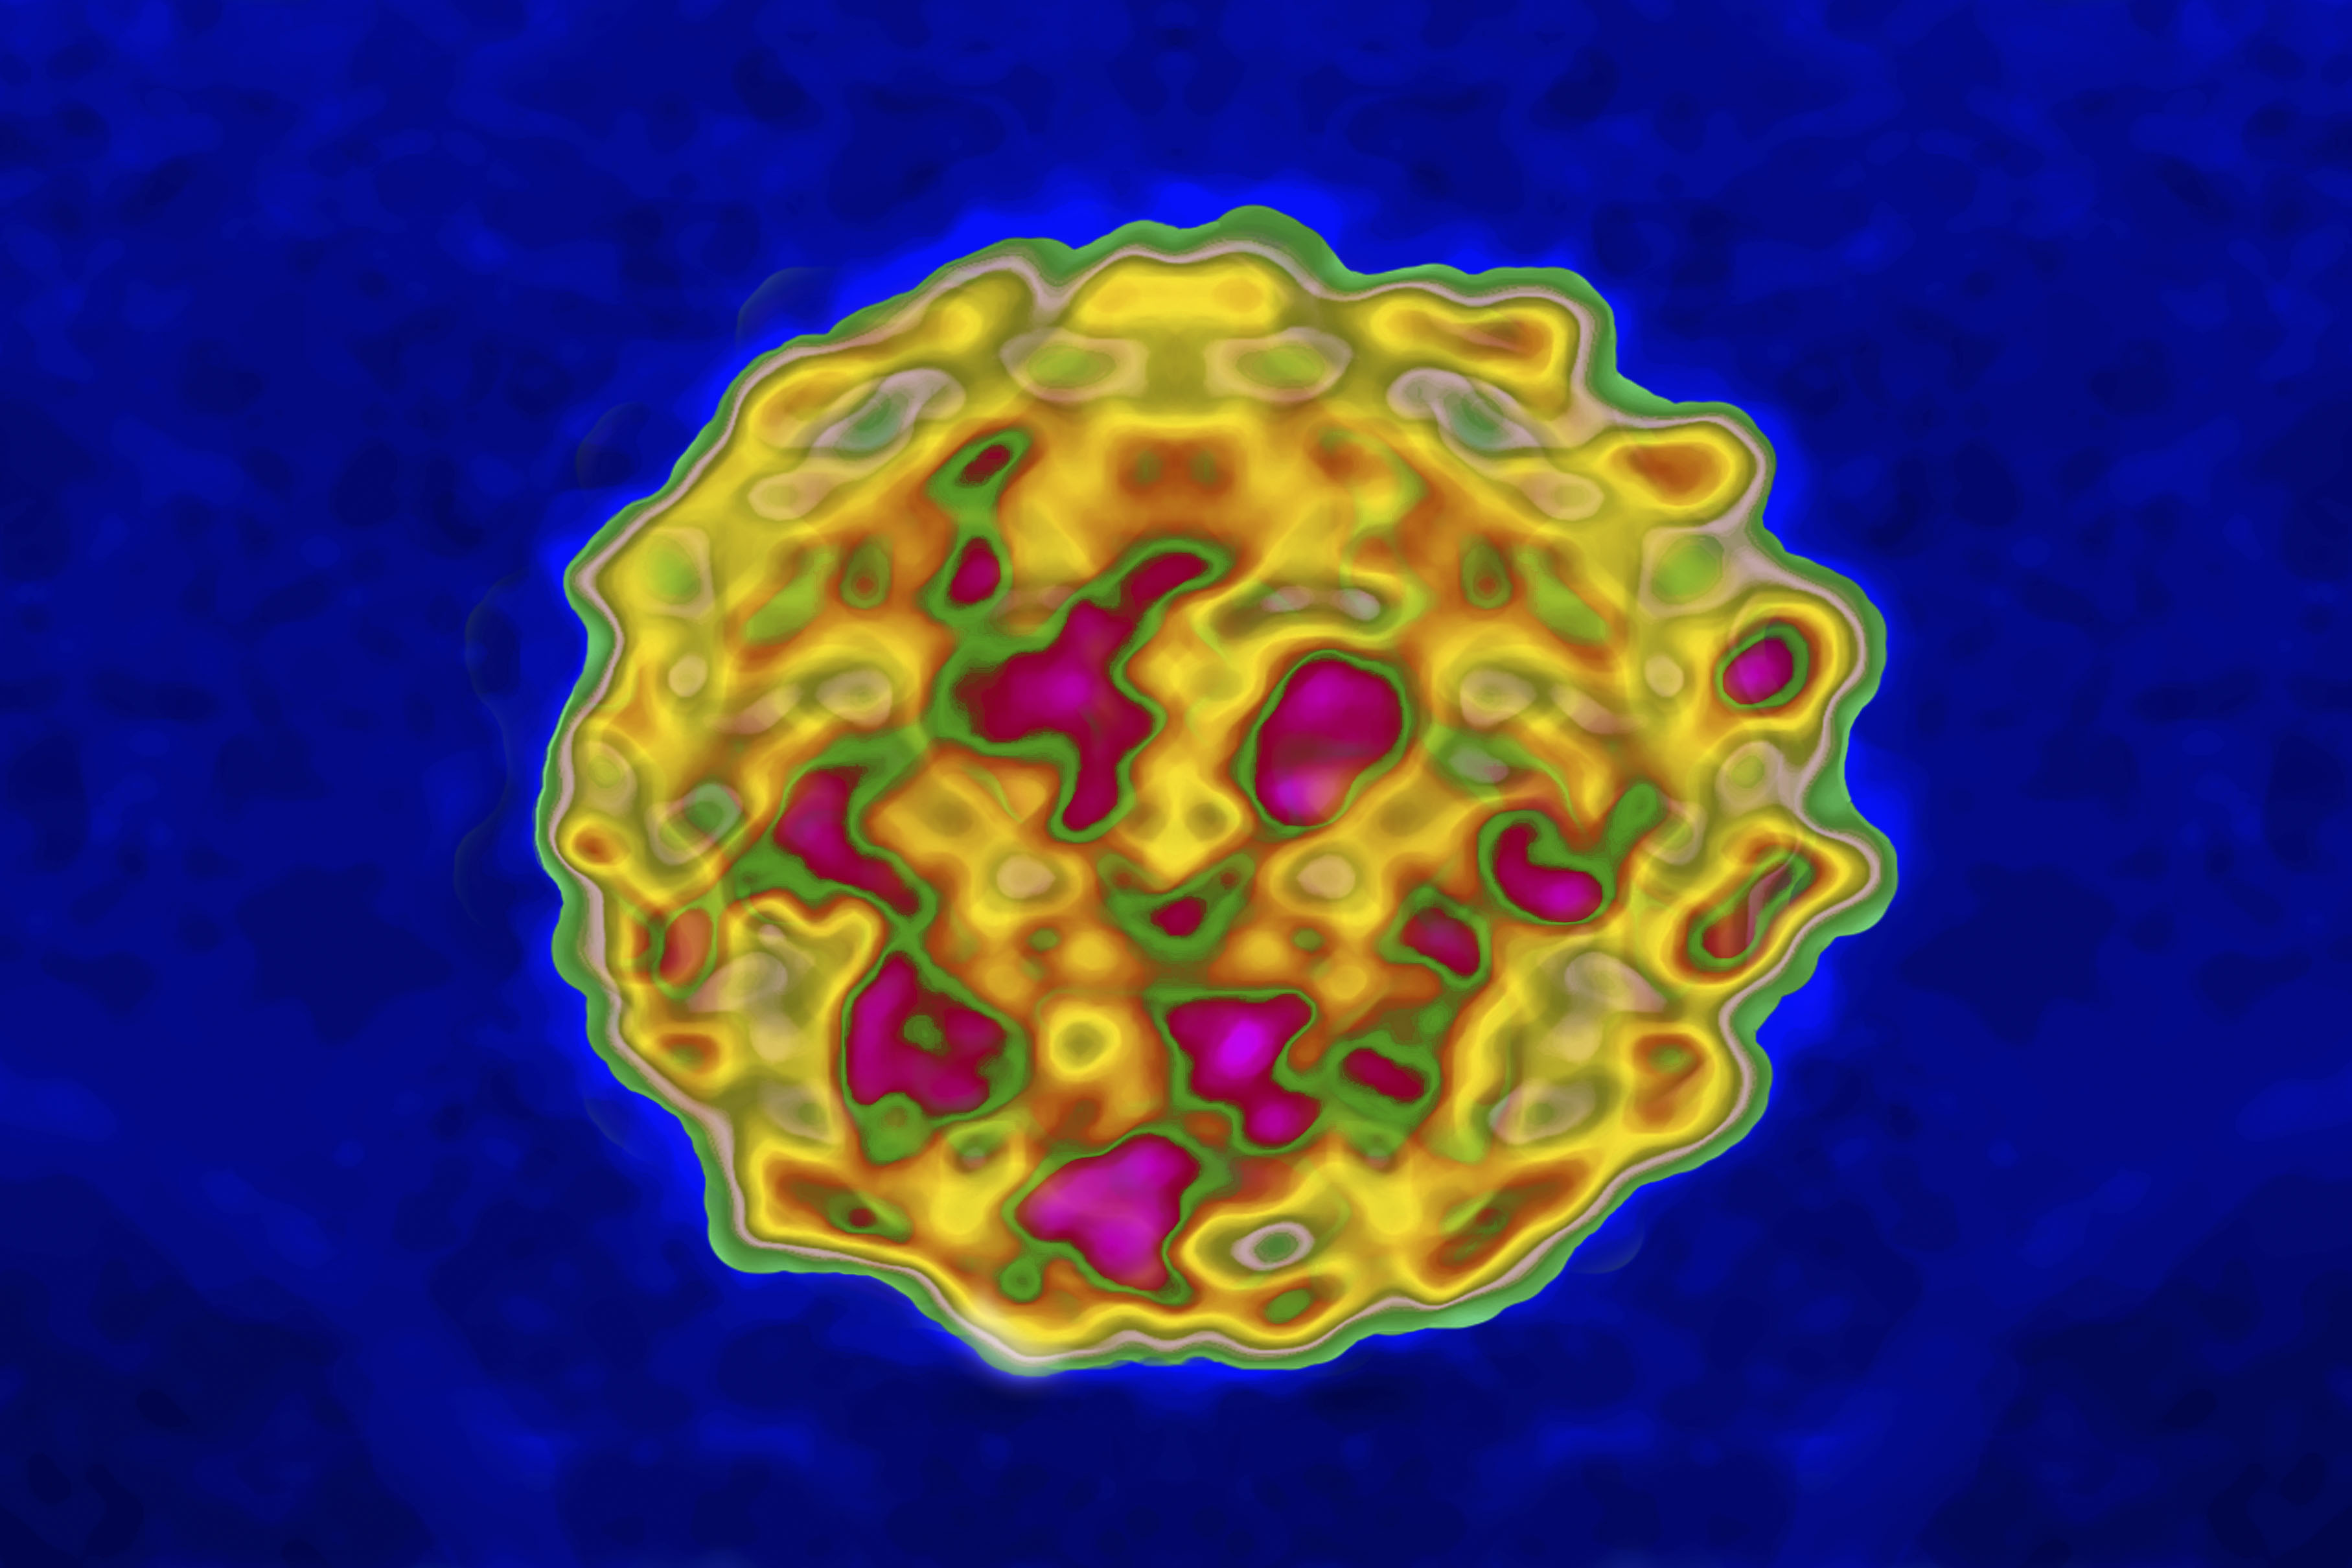 A representation of the Papilloma Virus(HPV) based on an electronic microscope magnification At 300000X. 